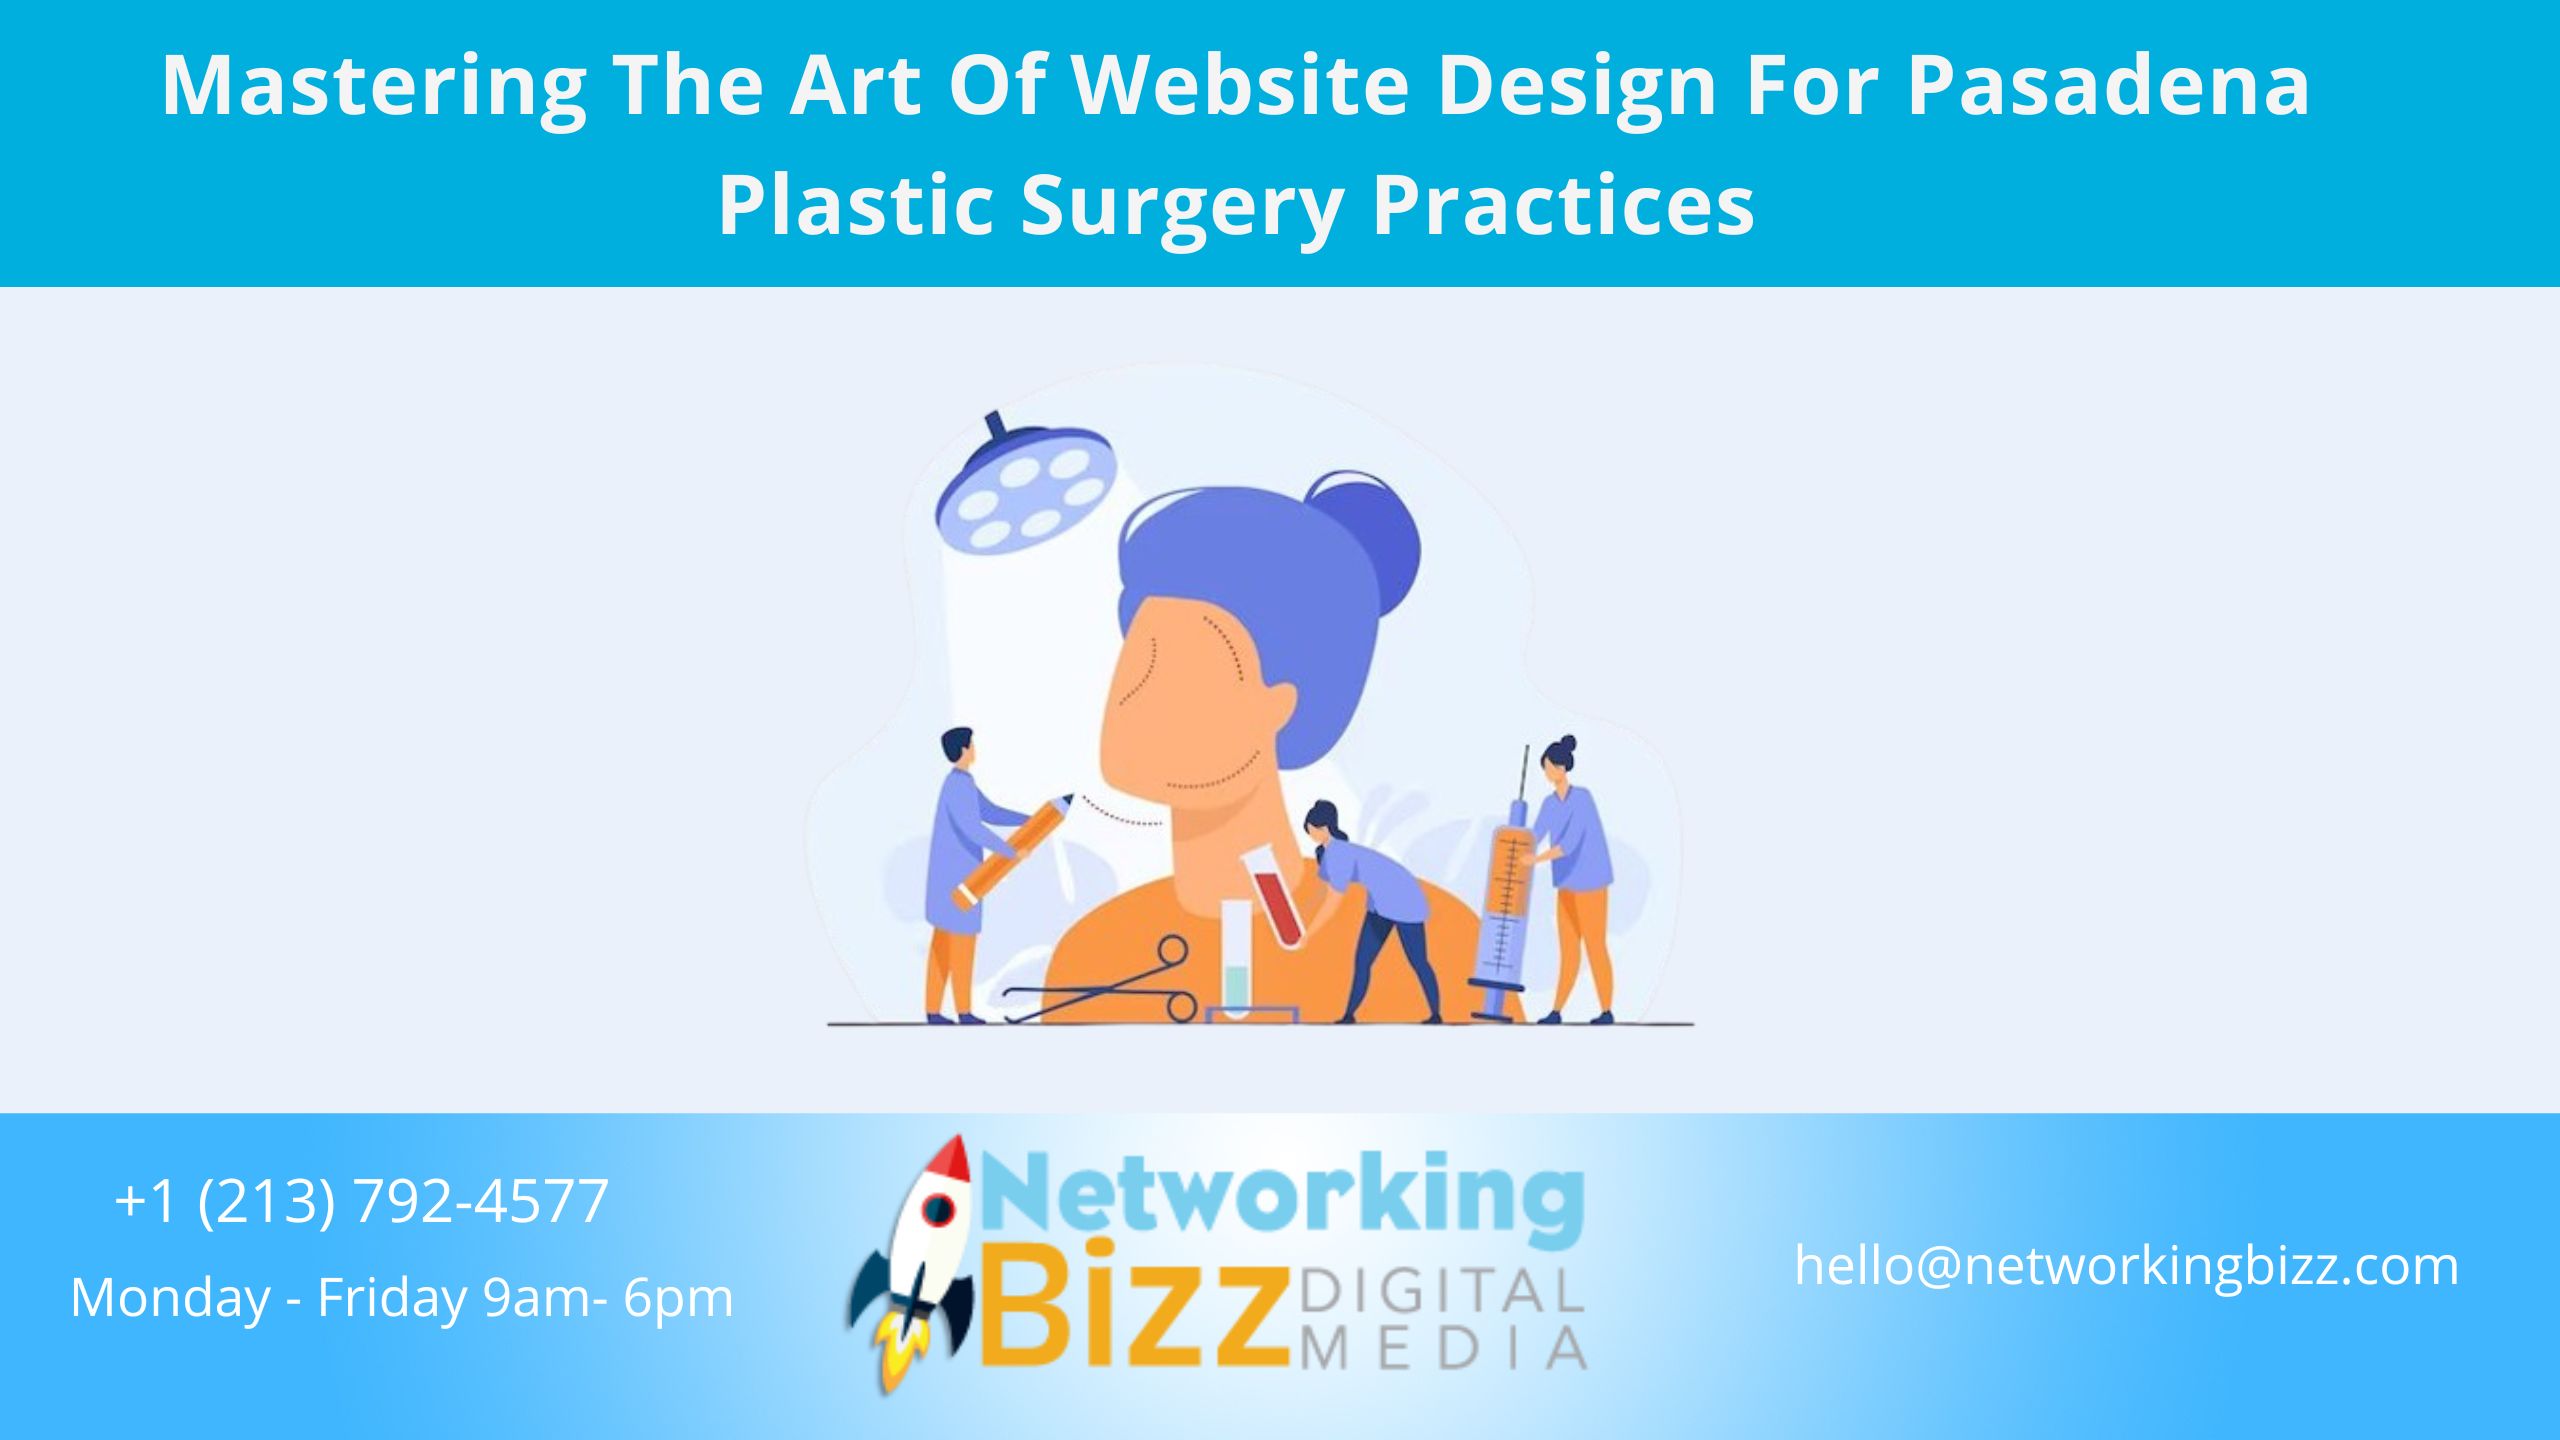 Mastering The Art Of Website Design For Pasadena Plastic Surgery Practices